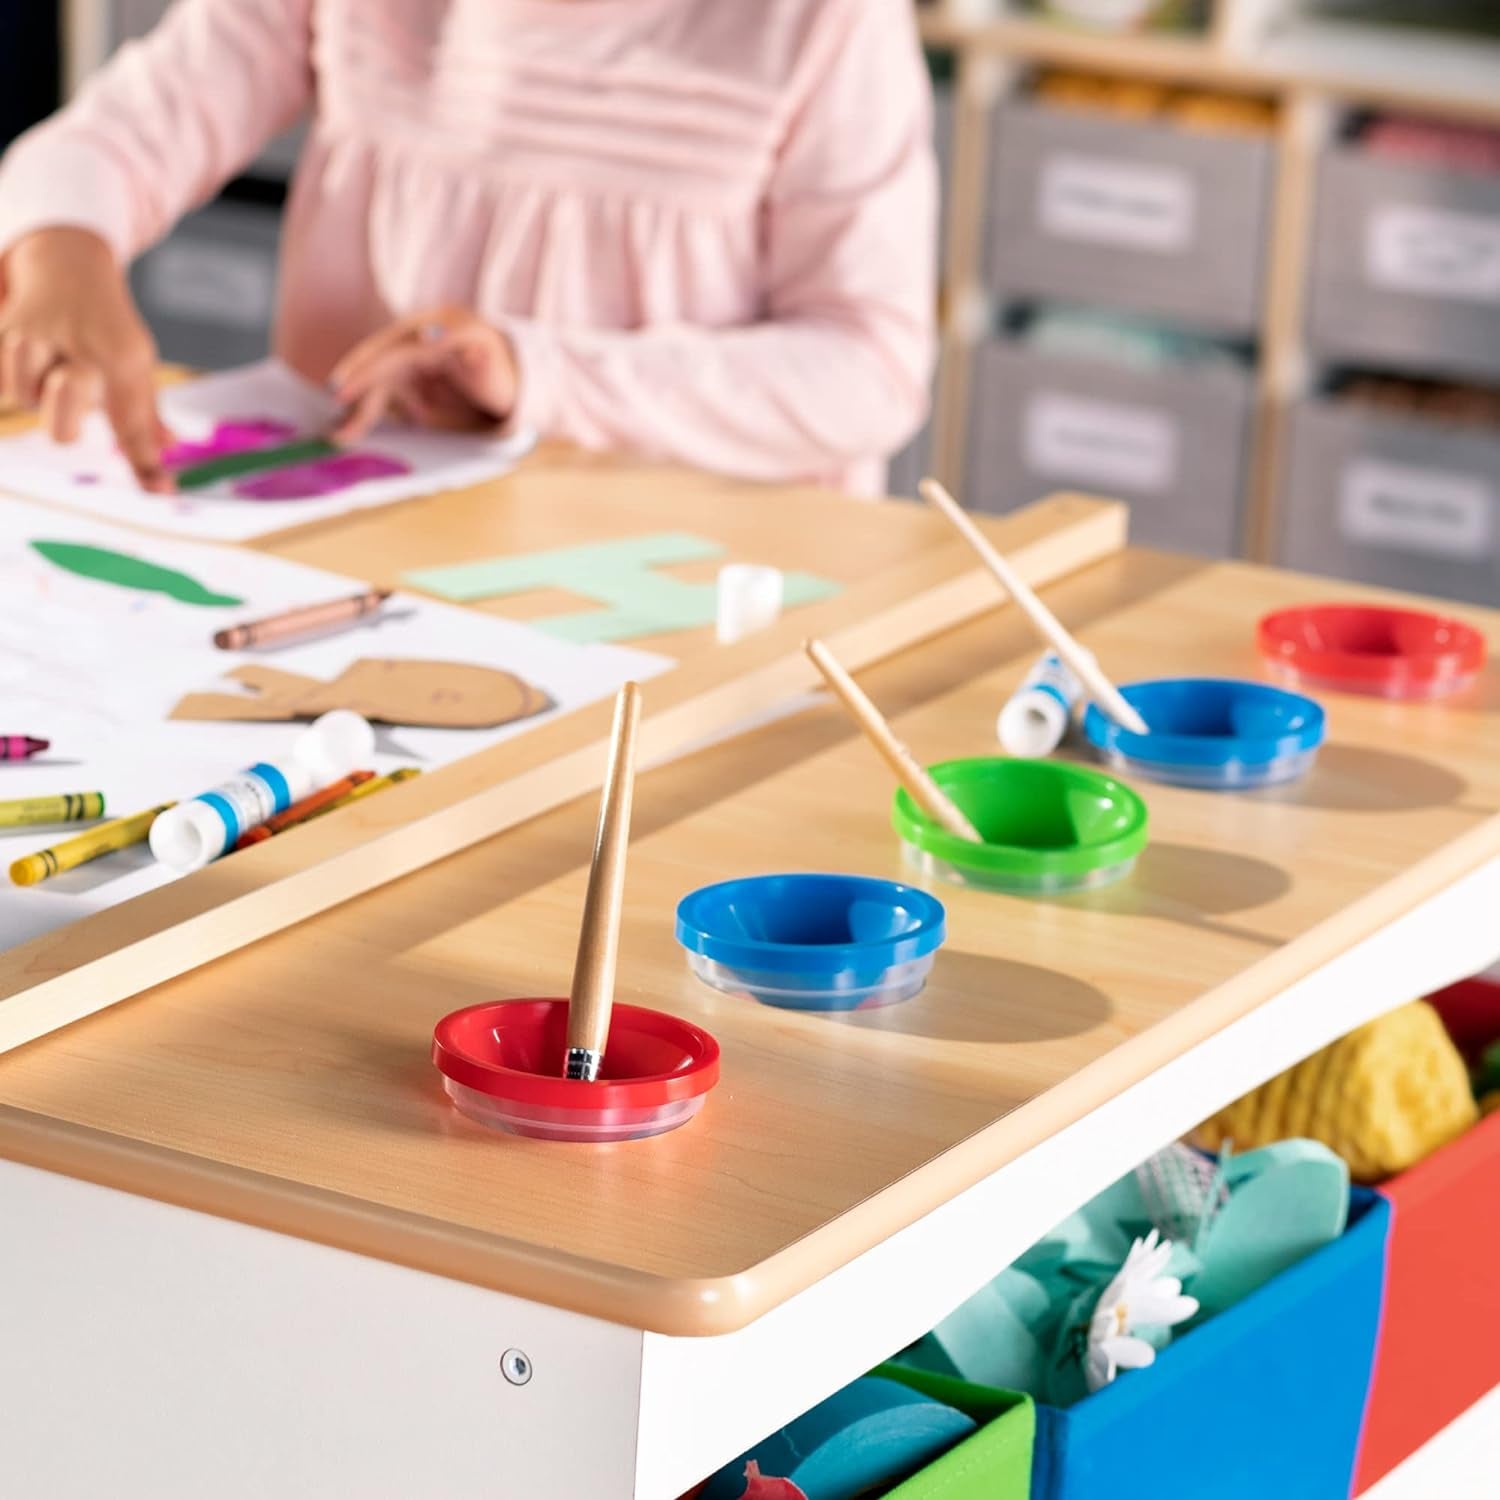 Arts and Crafts Center: Kids Activity Table and Drawing Desk with Stools, Storage Canvas Bins, Paper Roller, and Paint Cups | Toddlers Work Station - Children'S Wooden Learning Furniture